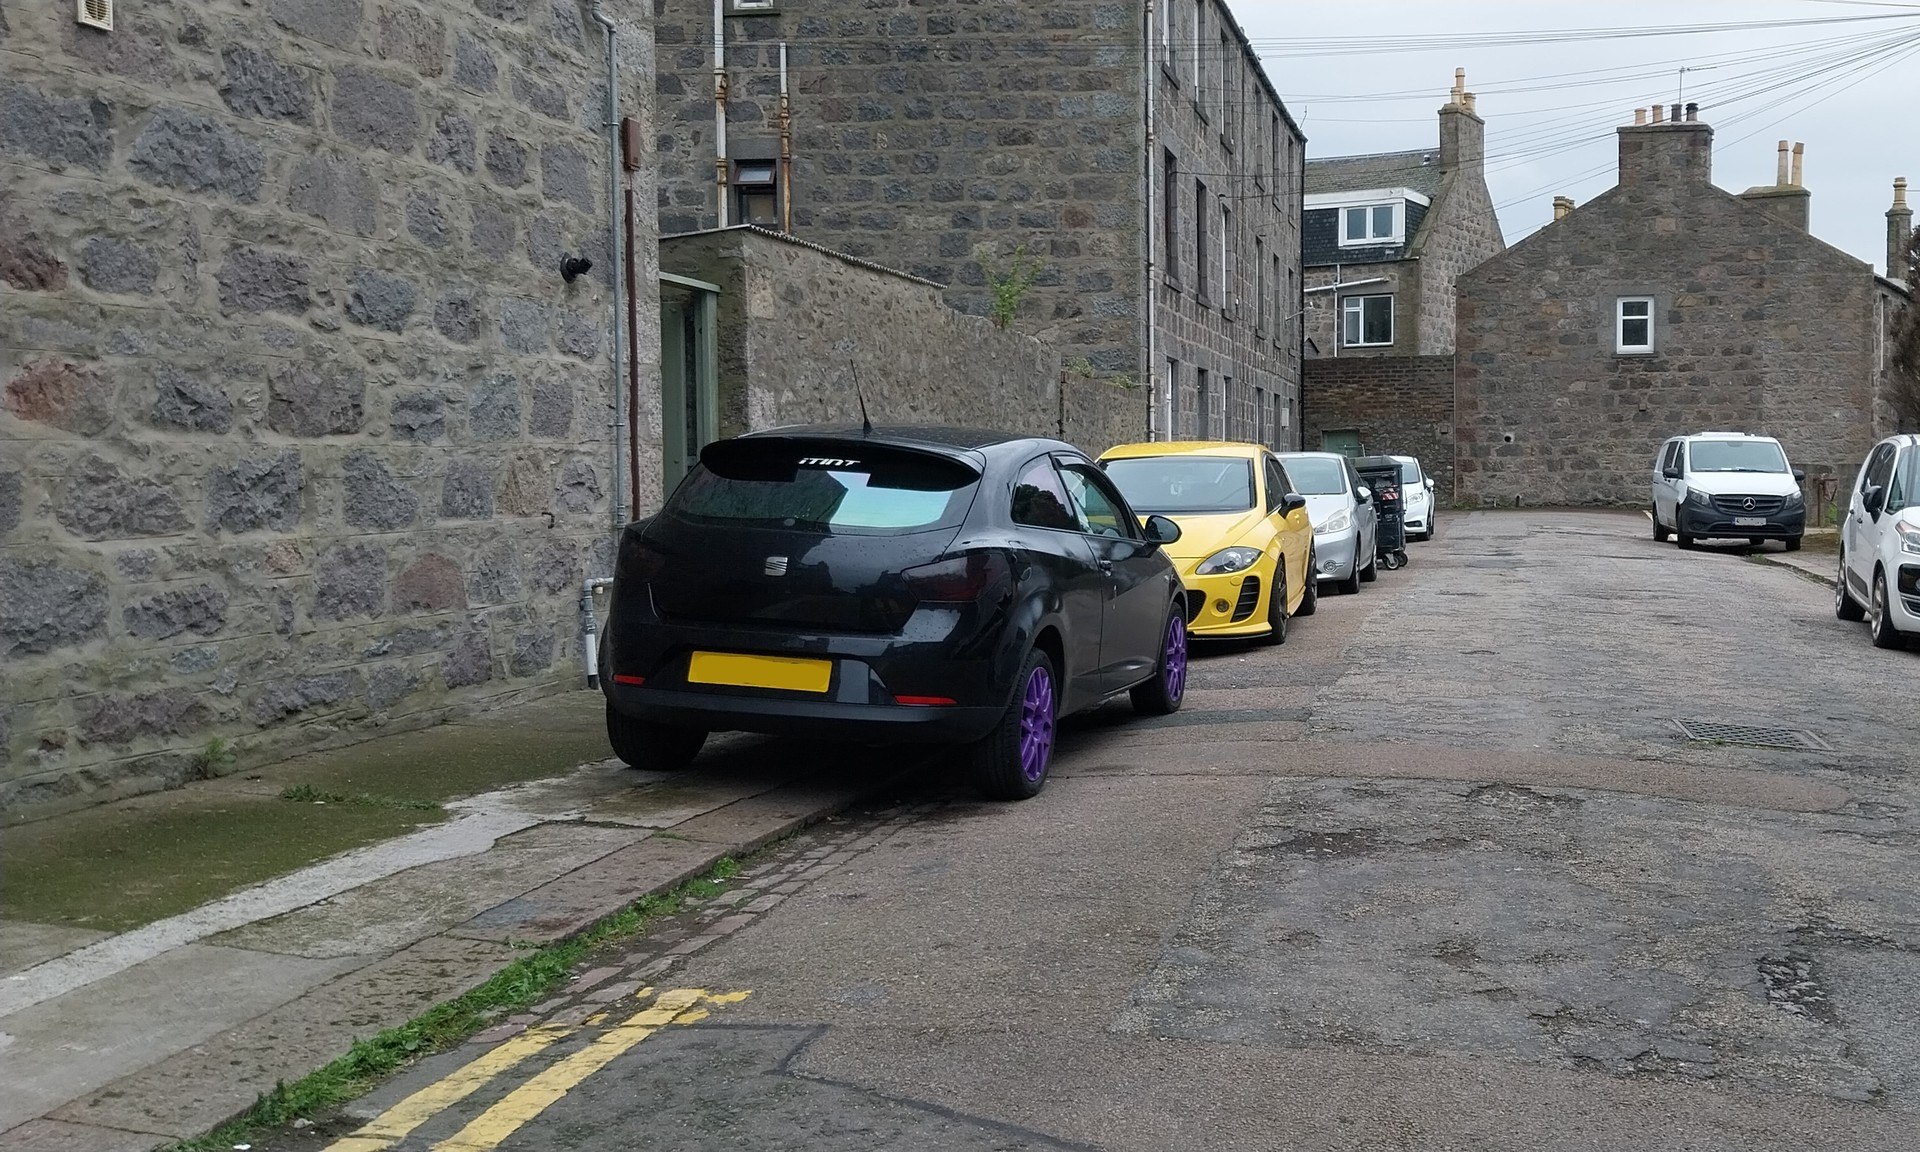 Aberdeen City Council has taken some time to officially enforce the rules.